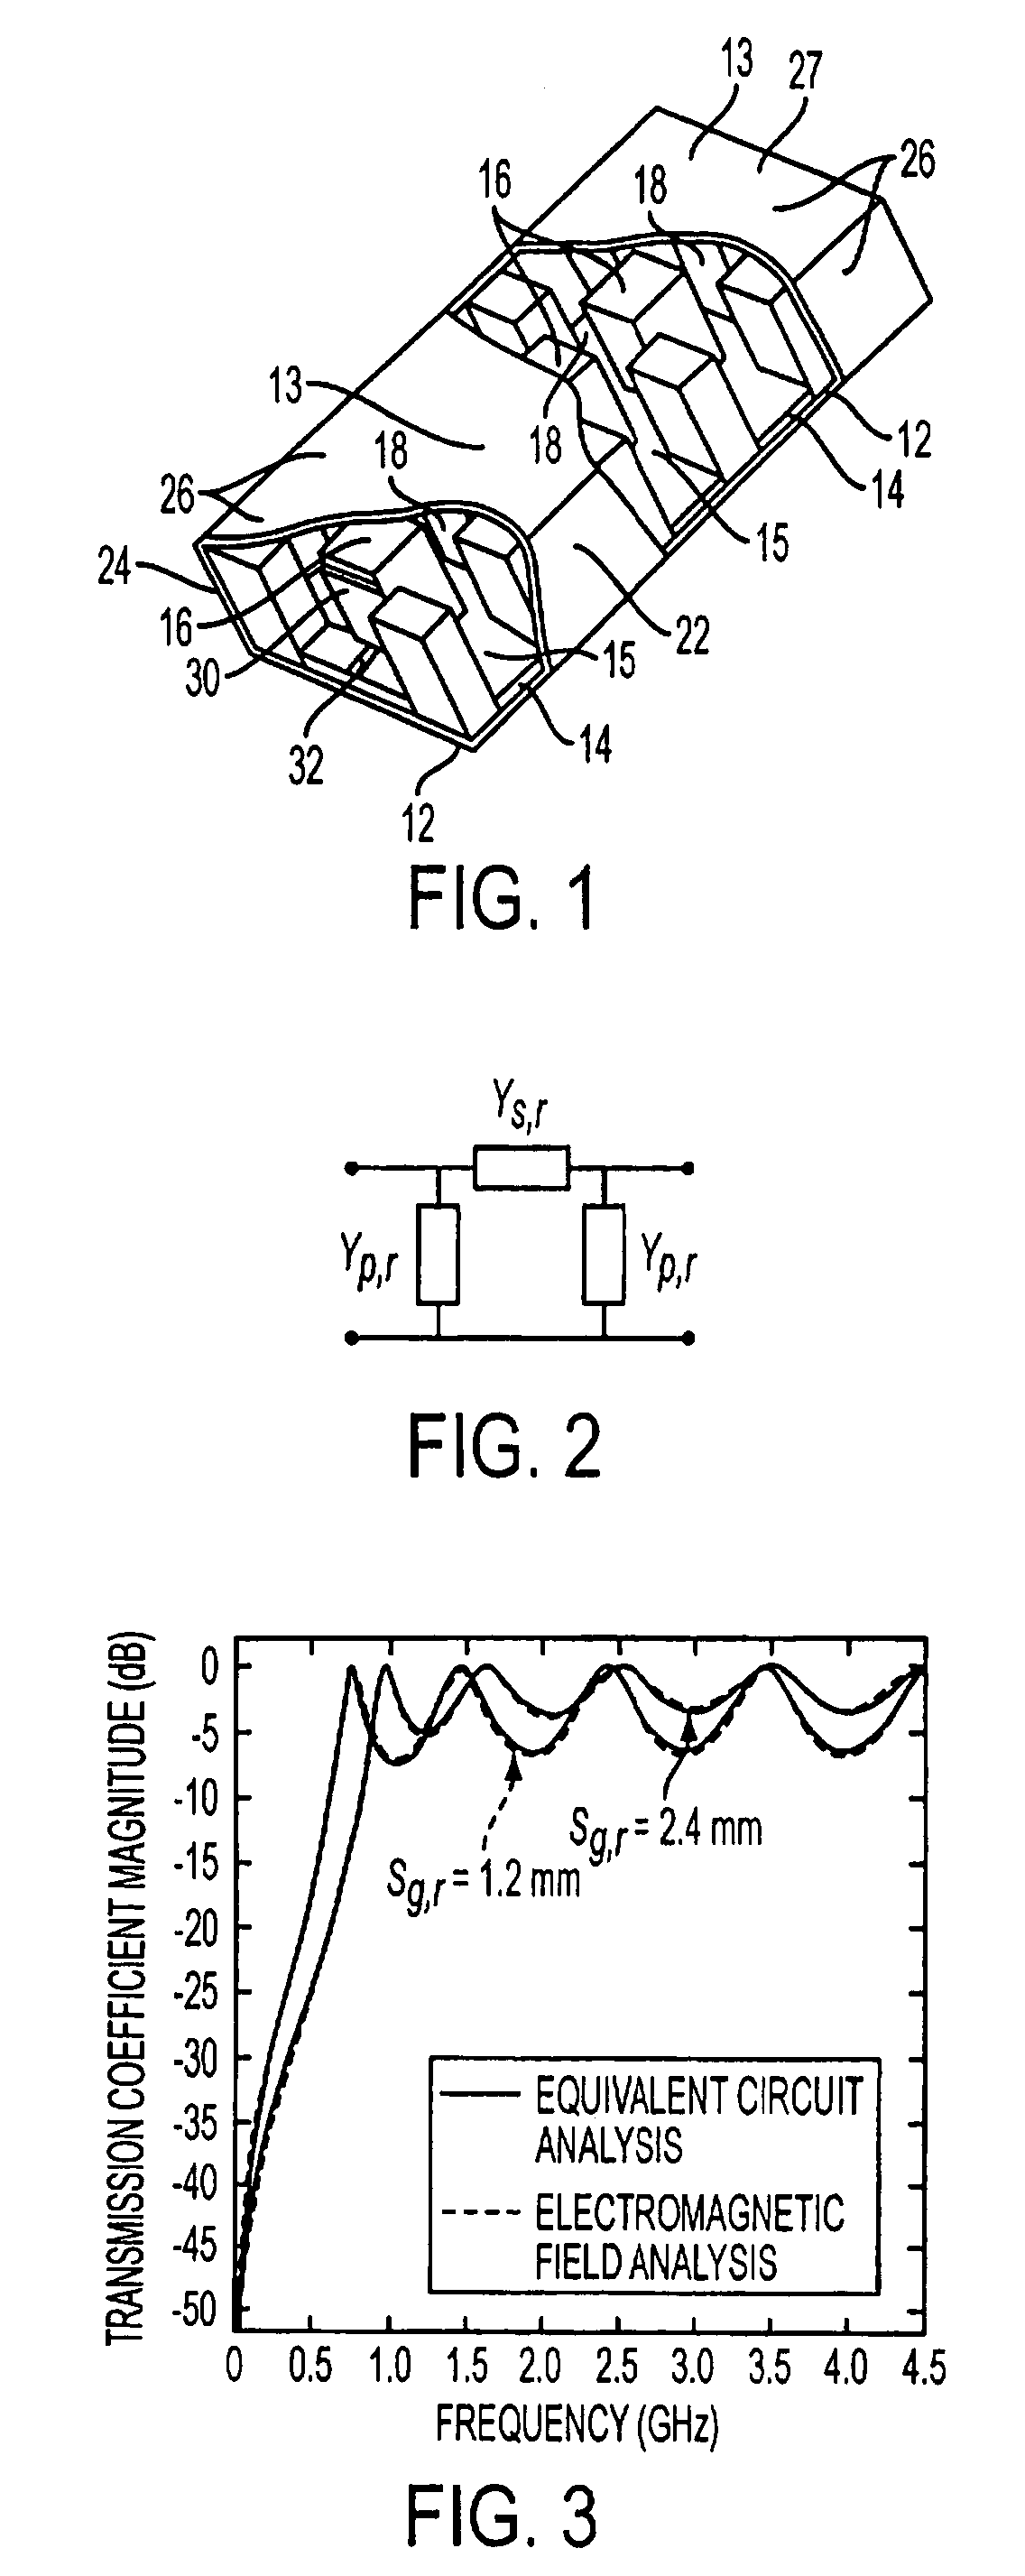 Ridge-waveguide filter and filter bank